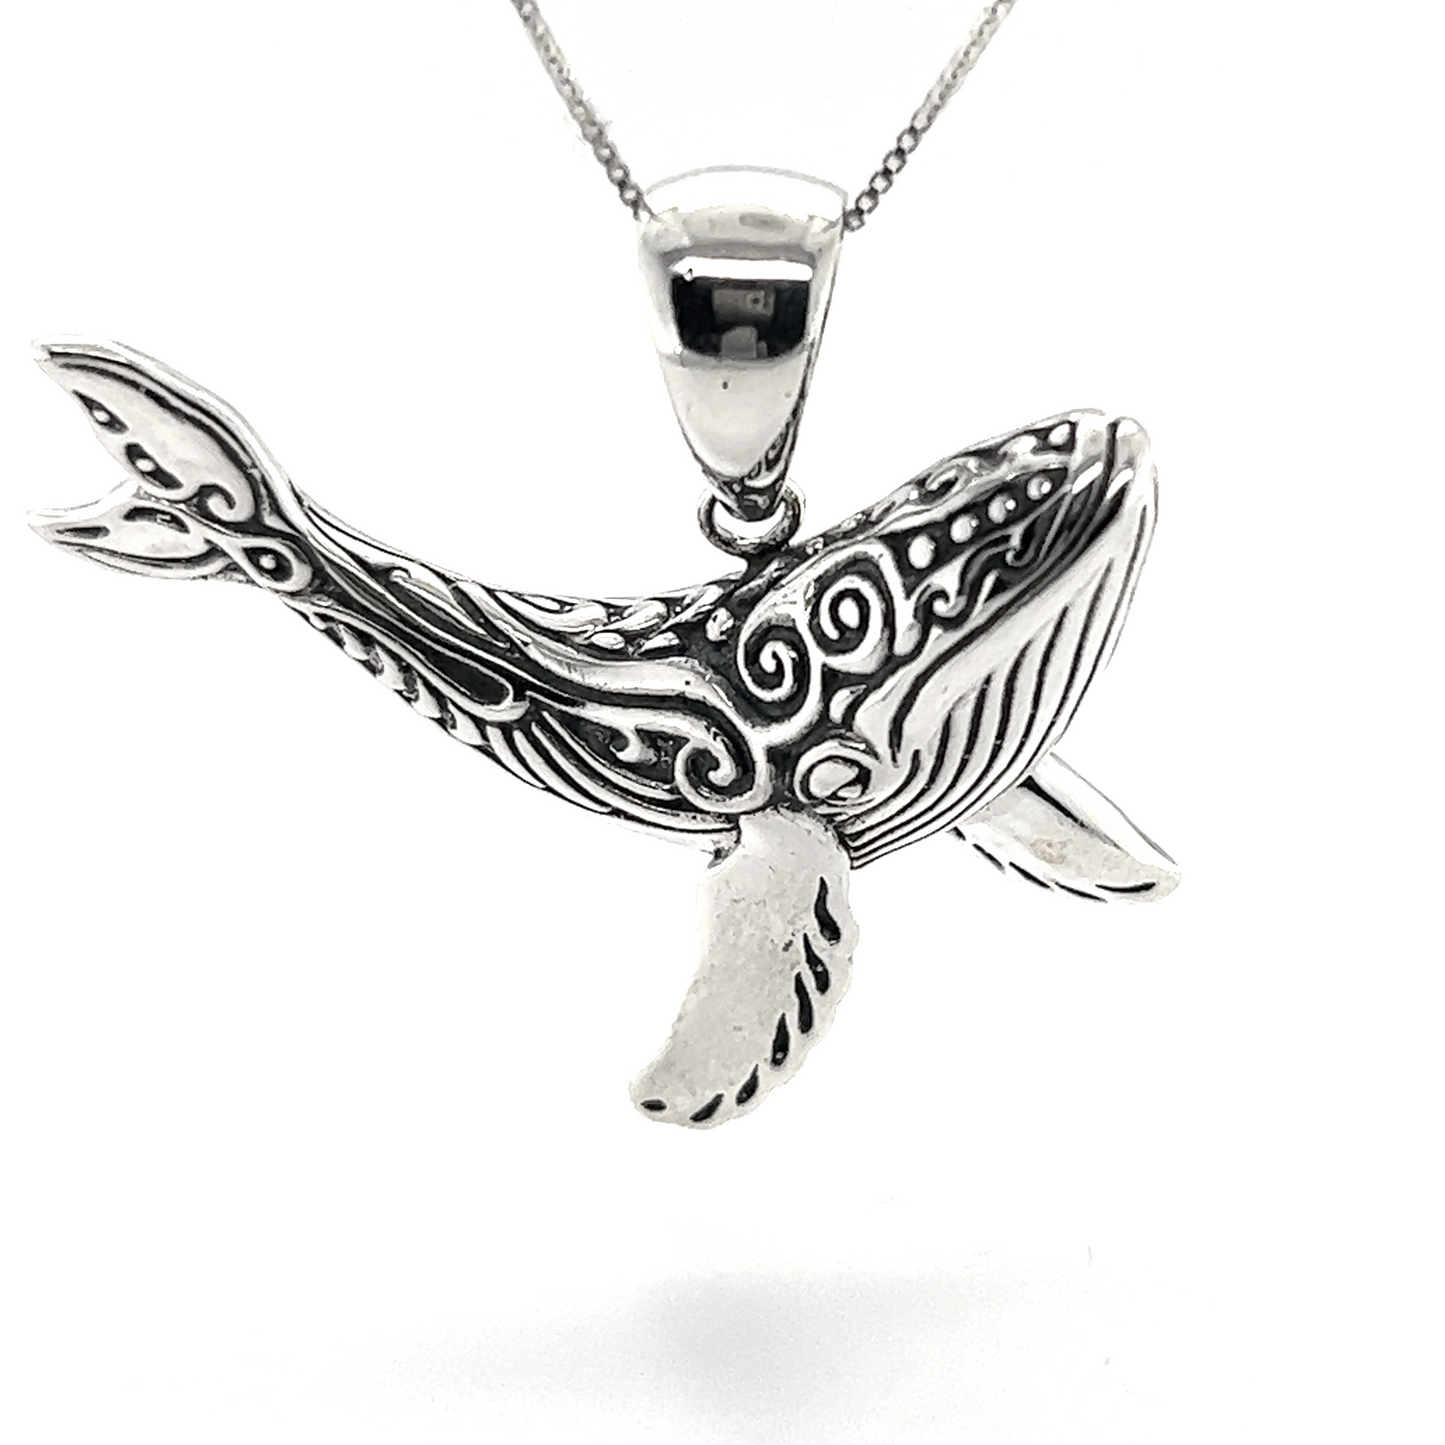 A stunning whale pendant from Super Silver, inspired by the Santa Cruz ocean, on a chain.